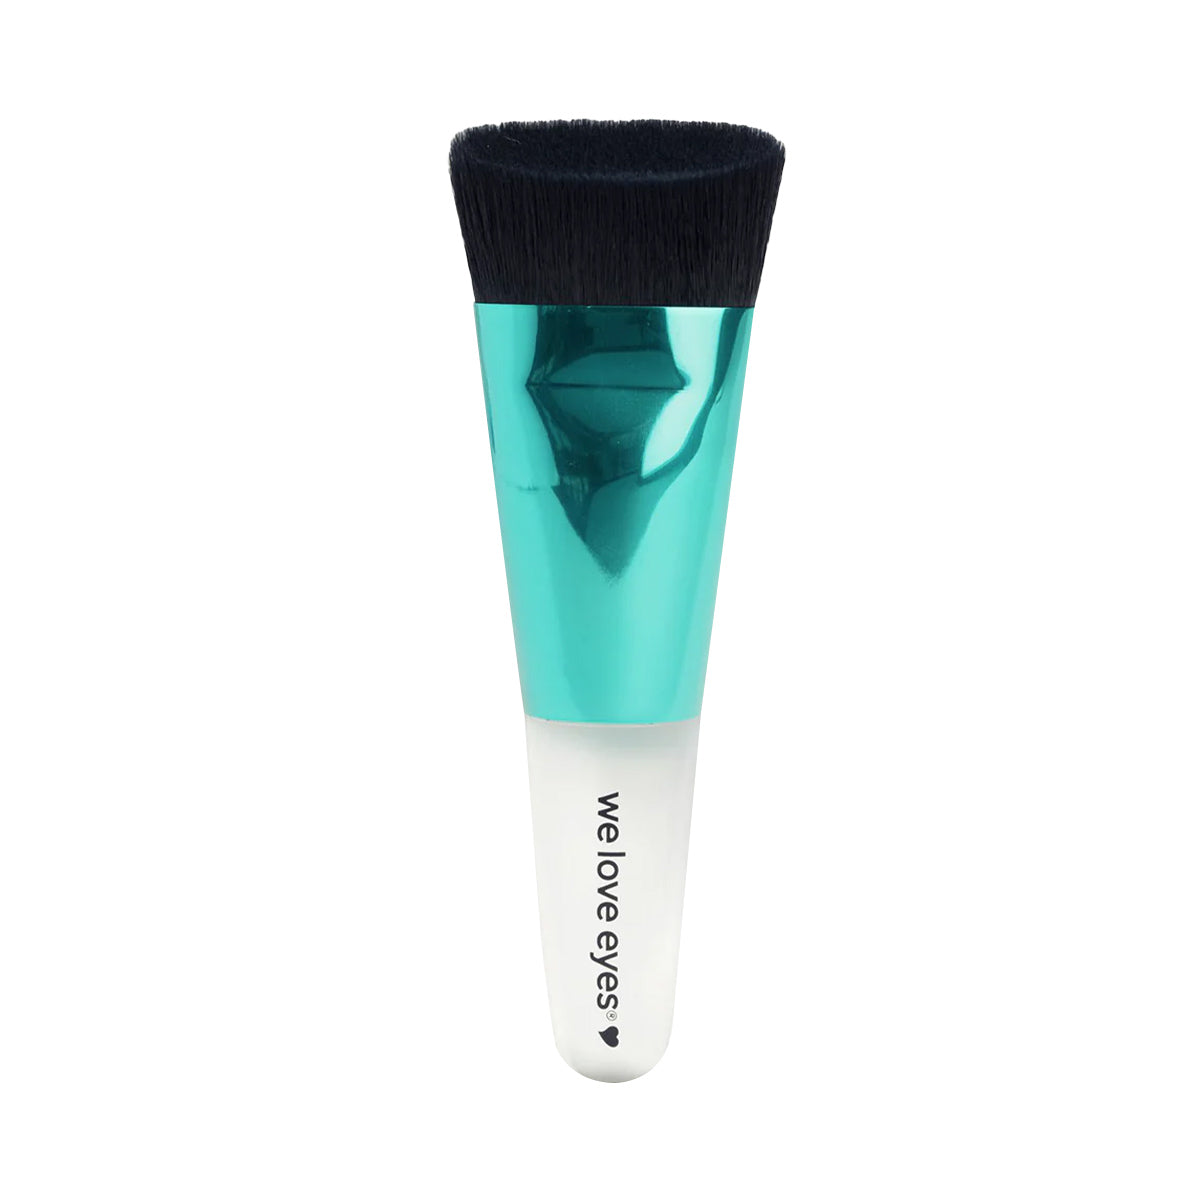 We Love Eyes - Lashfull Thinking lash and brow cleansing brush (oil Not Included)